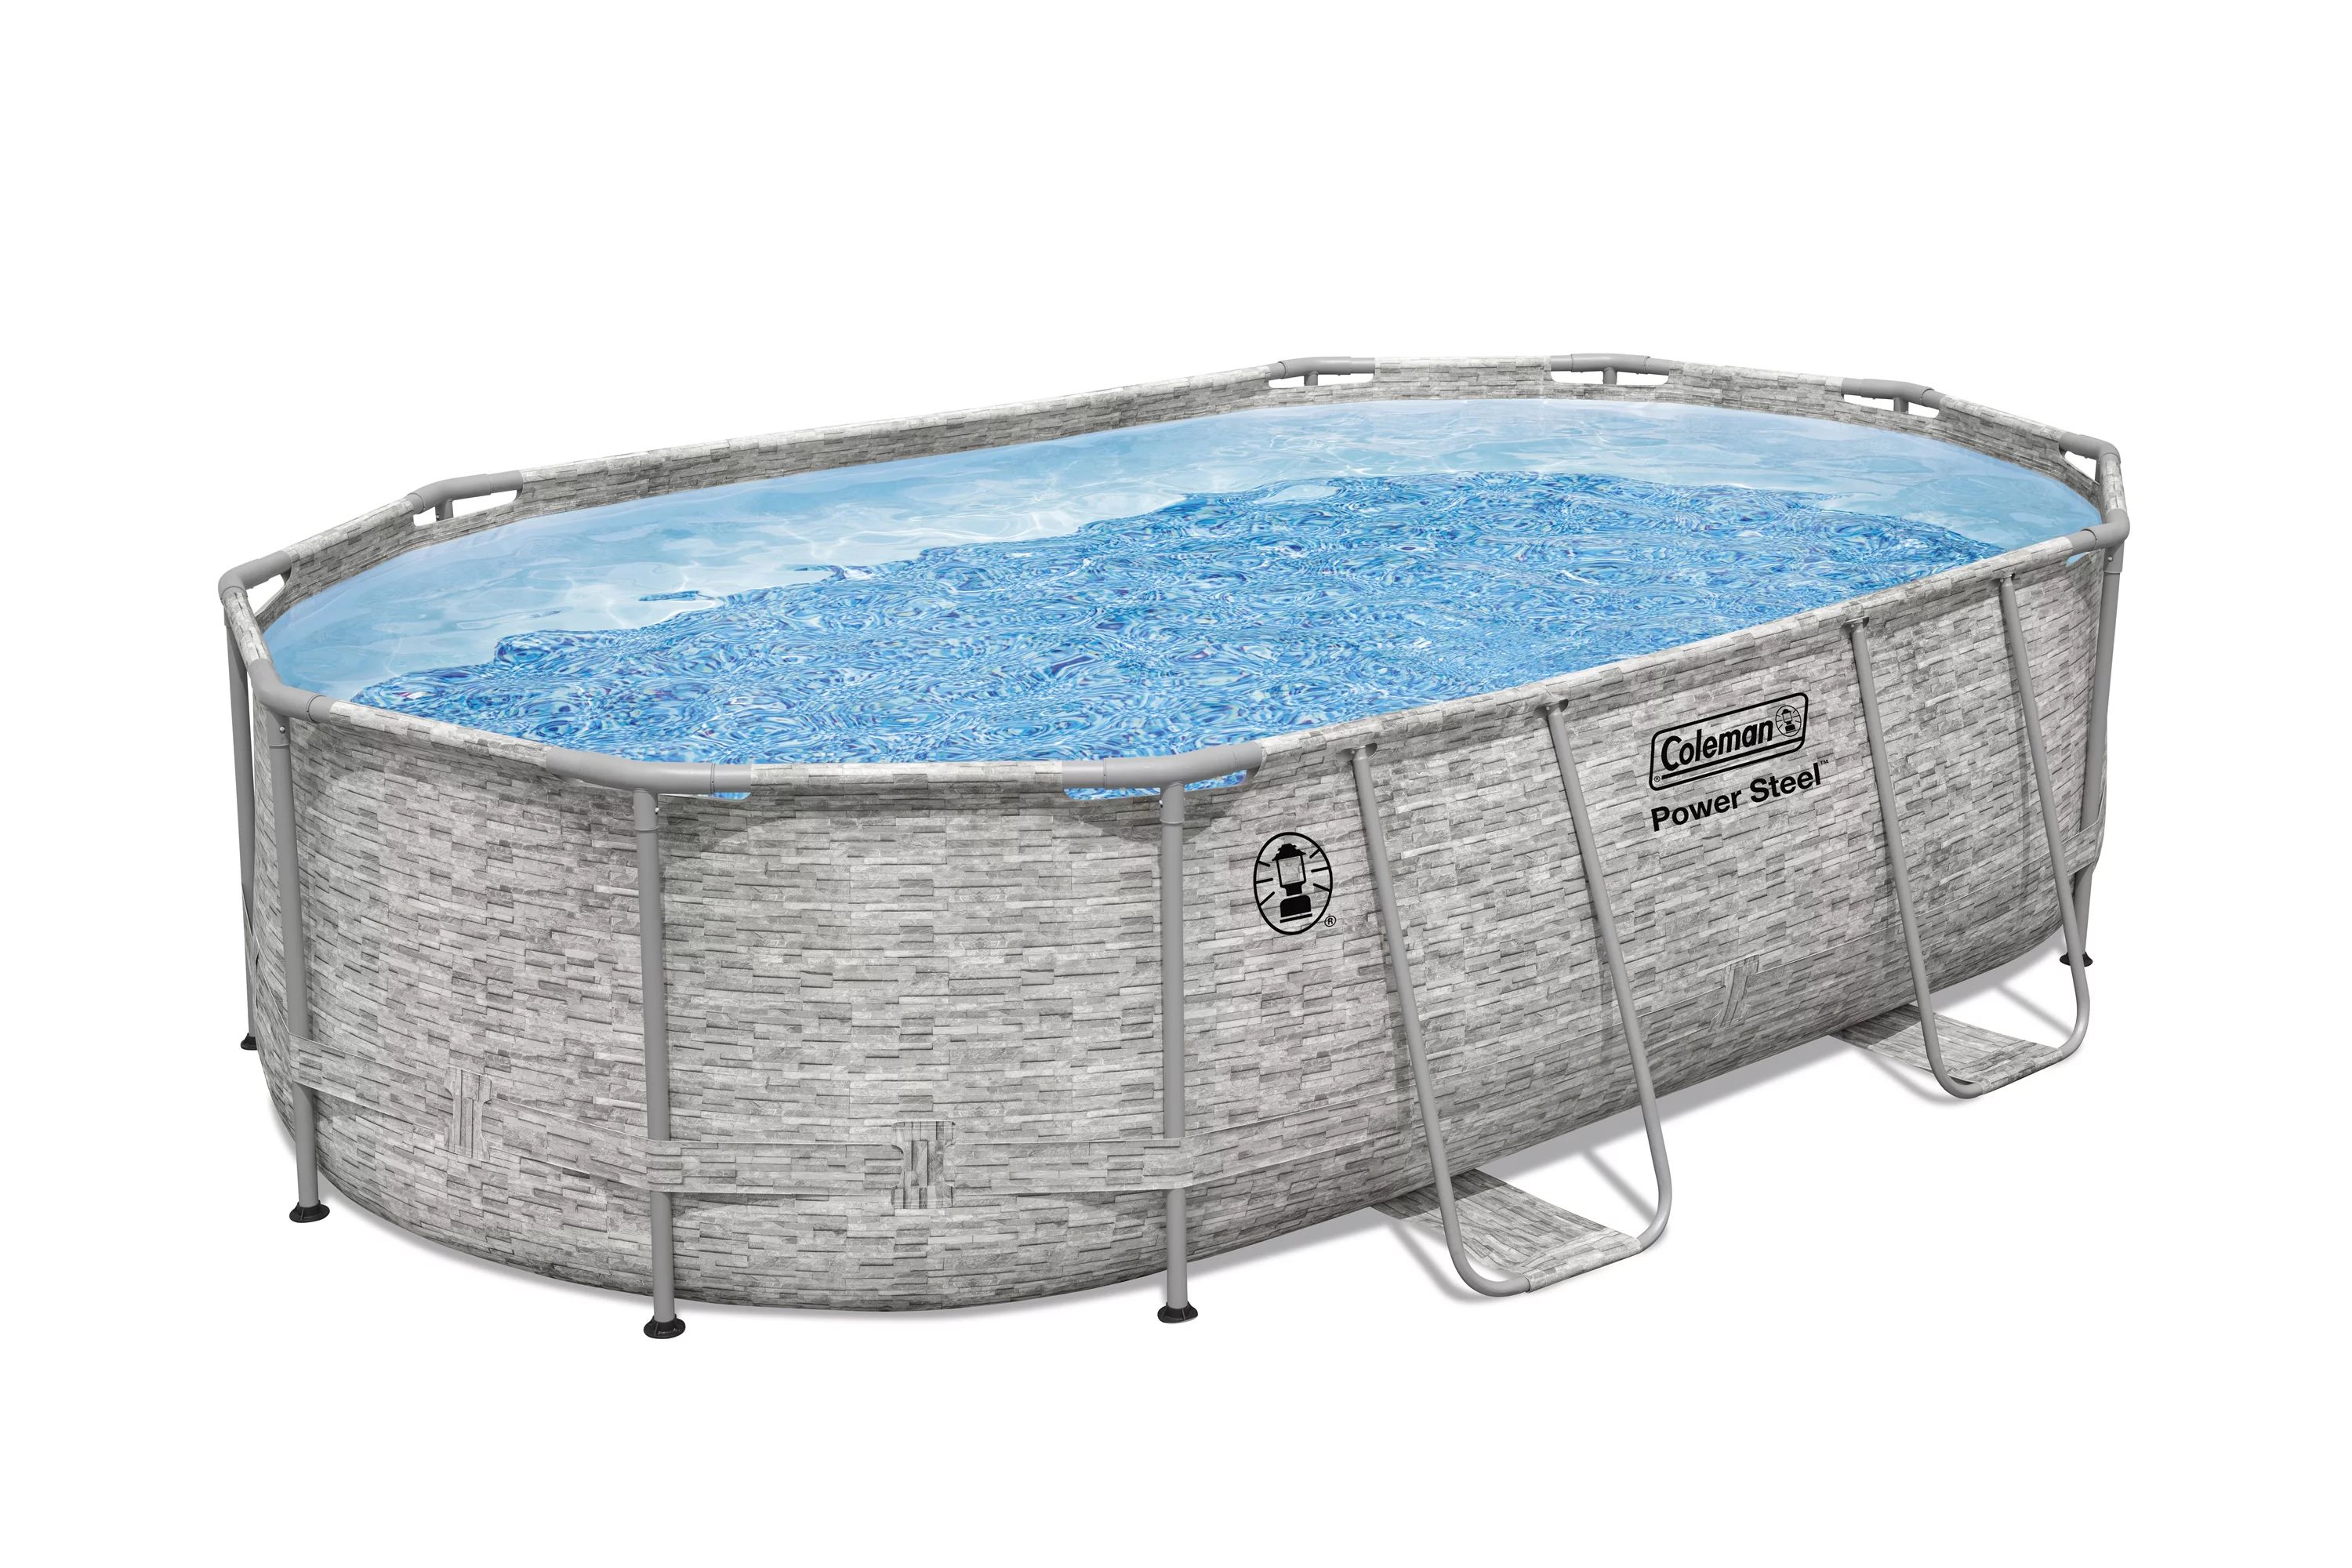 Coleman Power Steel 16 ft. x 10 ft. x 42 in. Oval Above Ground Pool Set | Walmart (US)